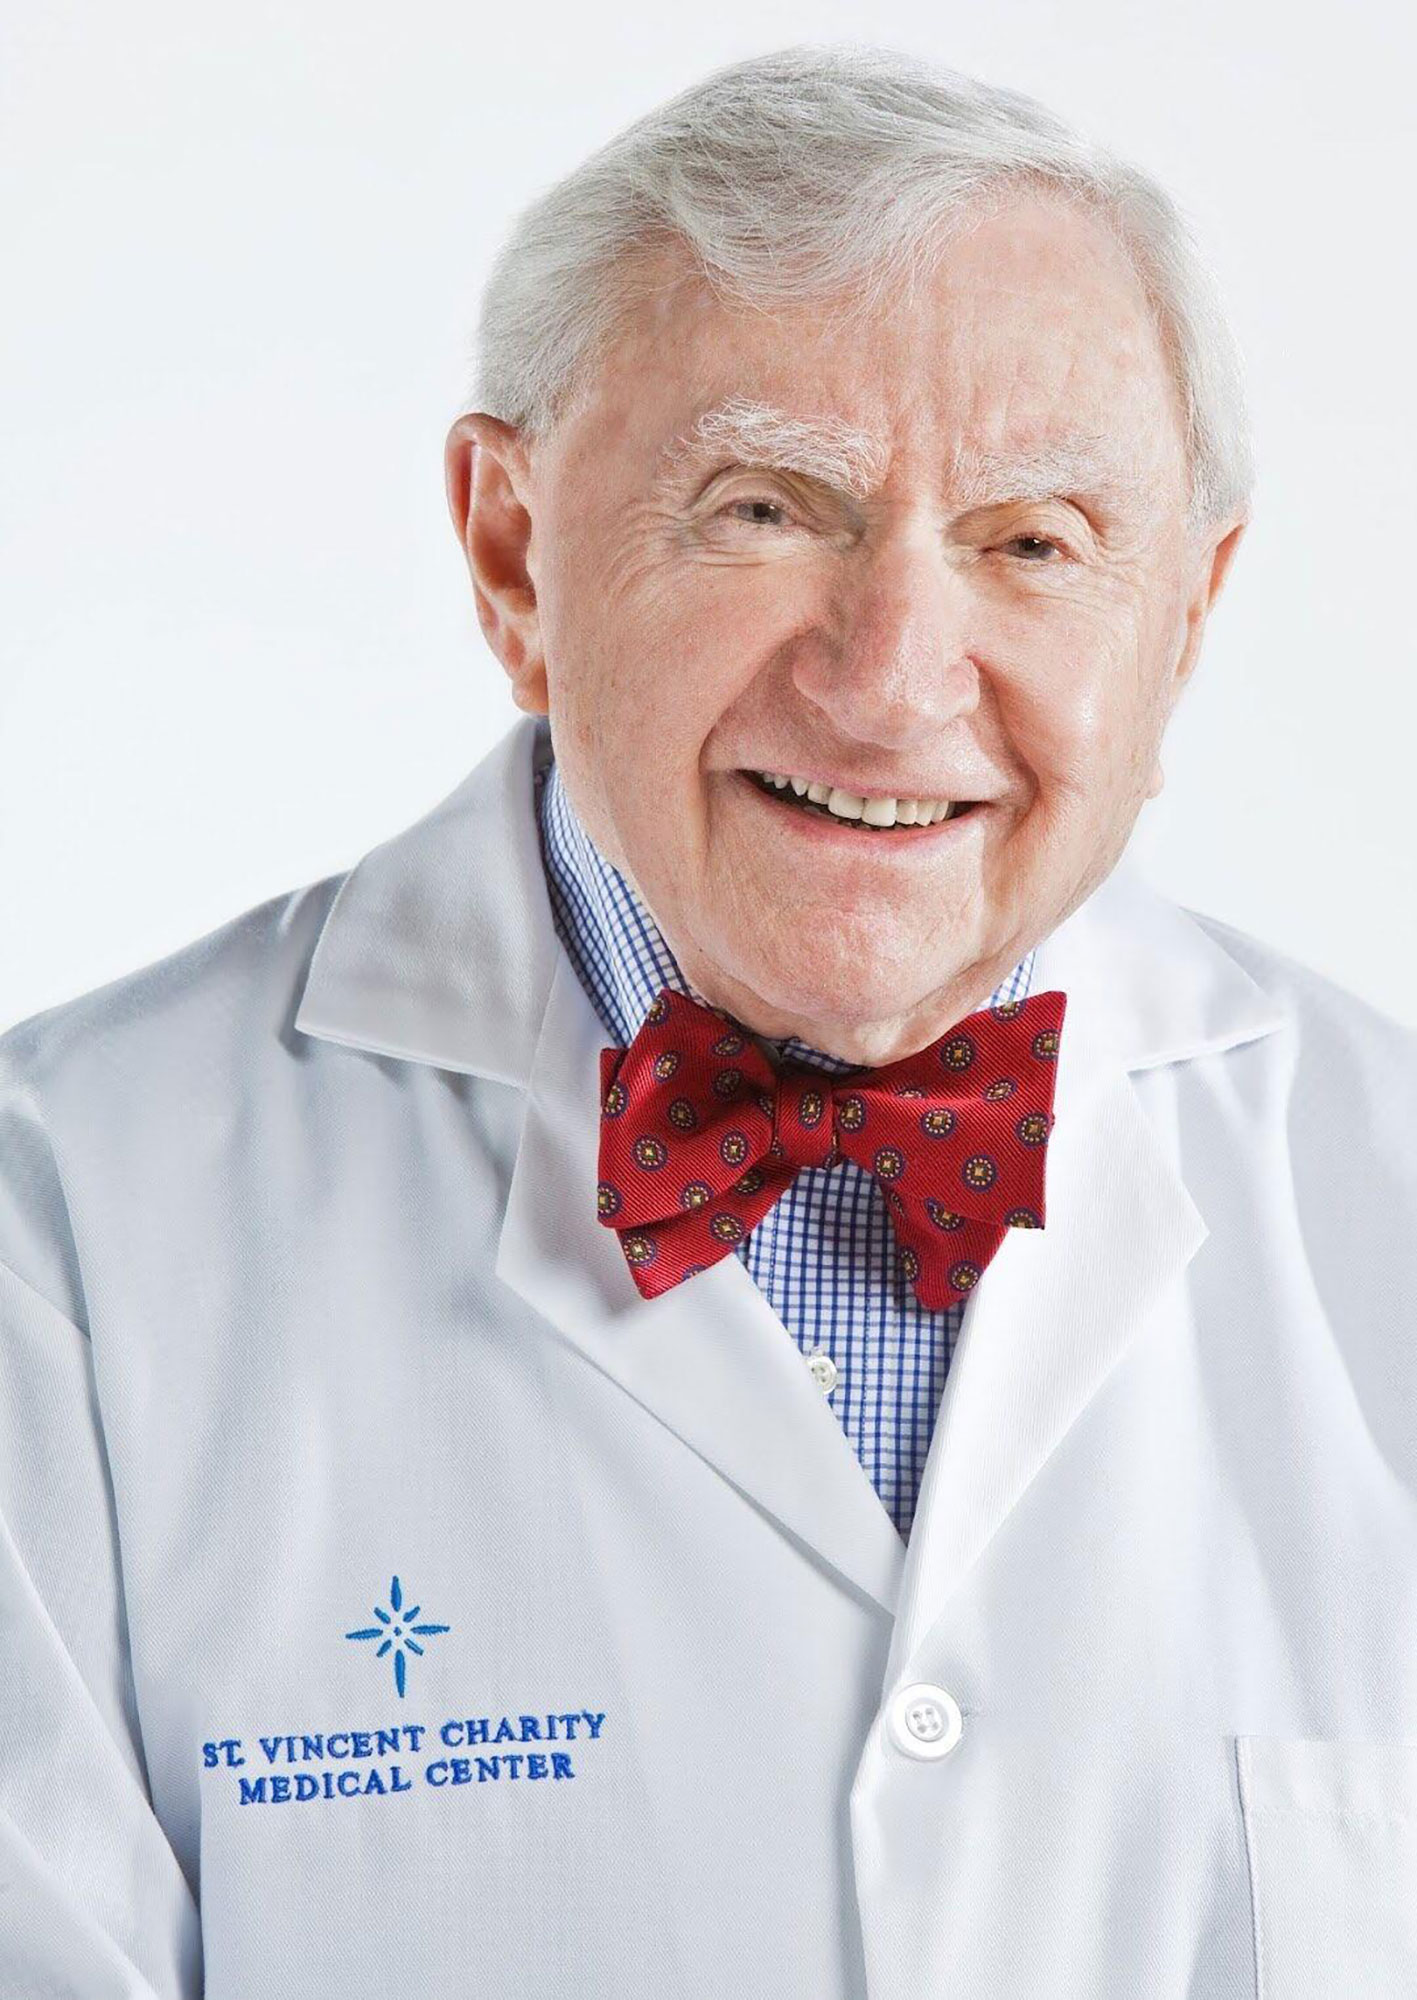 World's oldest practicing doctor turns 100: 'Retirement is the enemy of longevity' - Are we able to pull any images of Dr. Howard Tucker — the oldest practicing doctor. Credit: St. Vincent Charity Medical Center